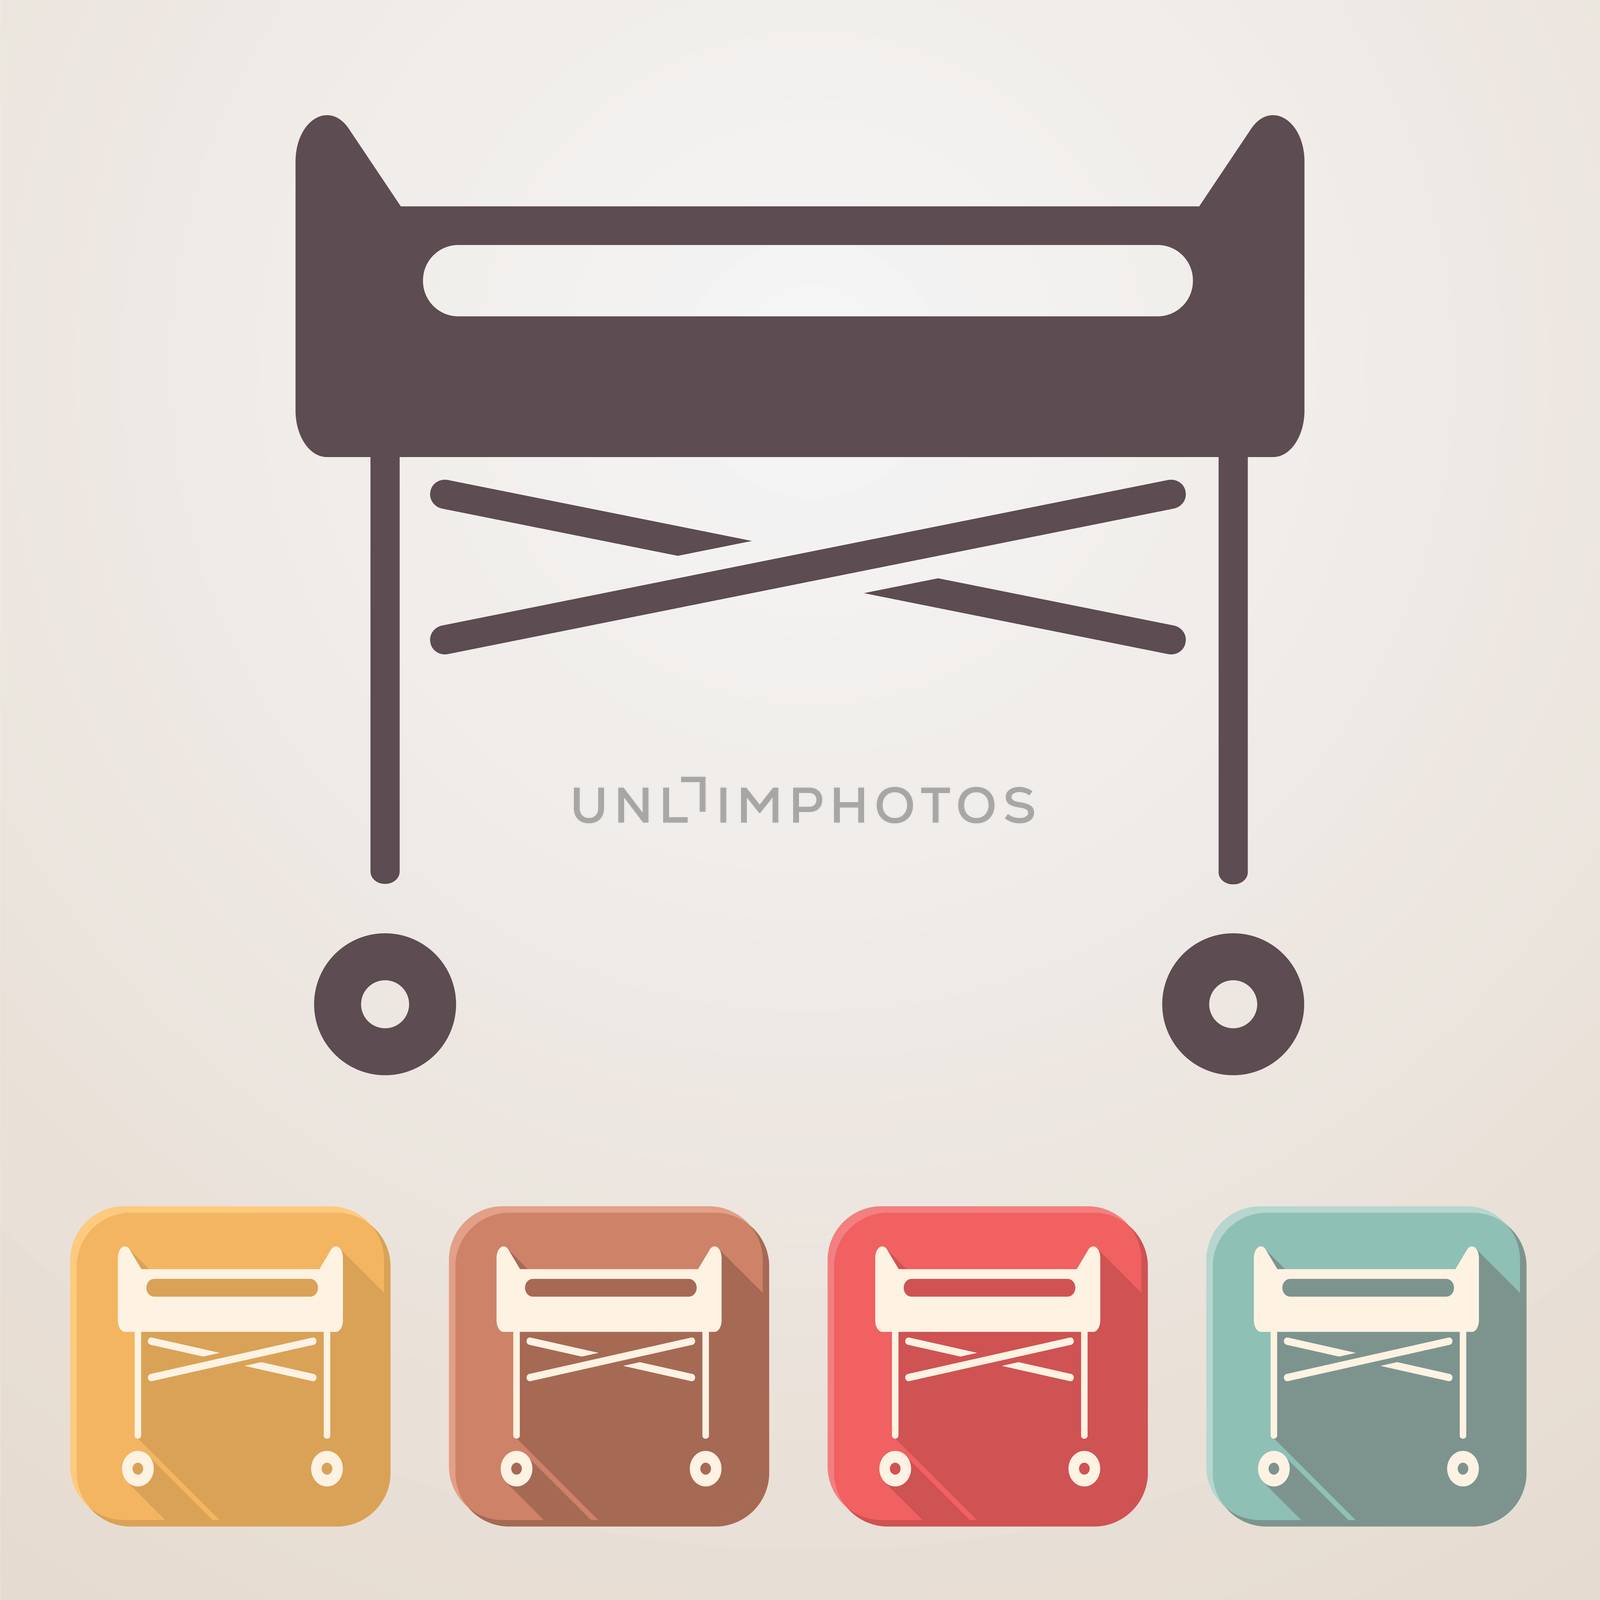 Hospital crib flat icon set in color boxes with shadow.